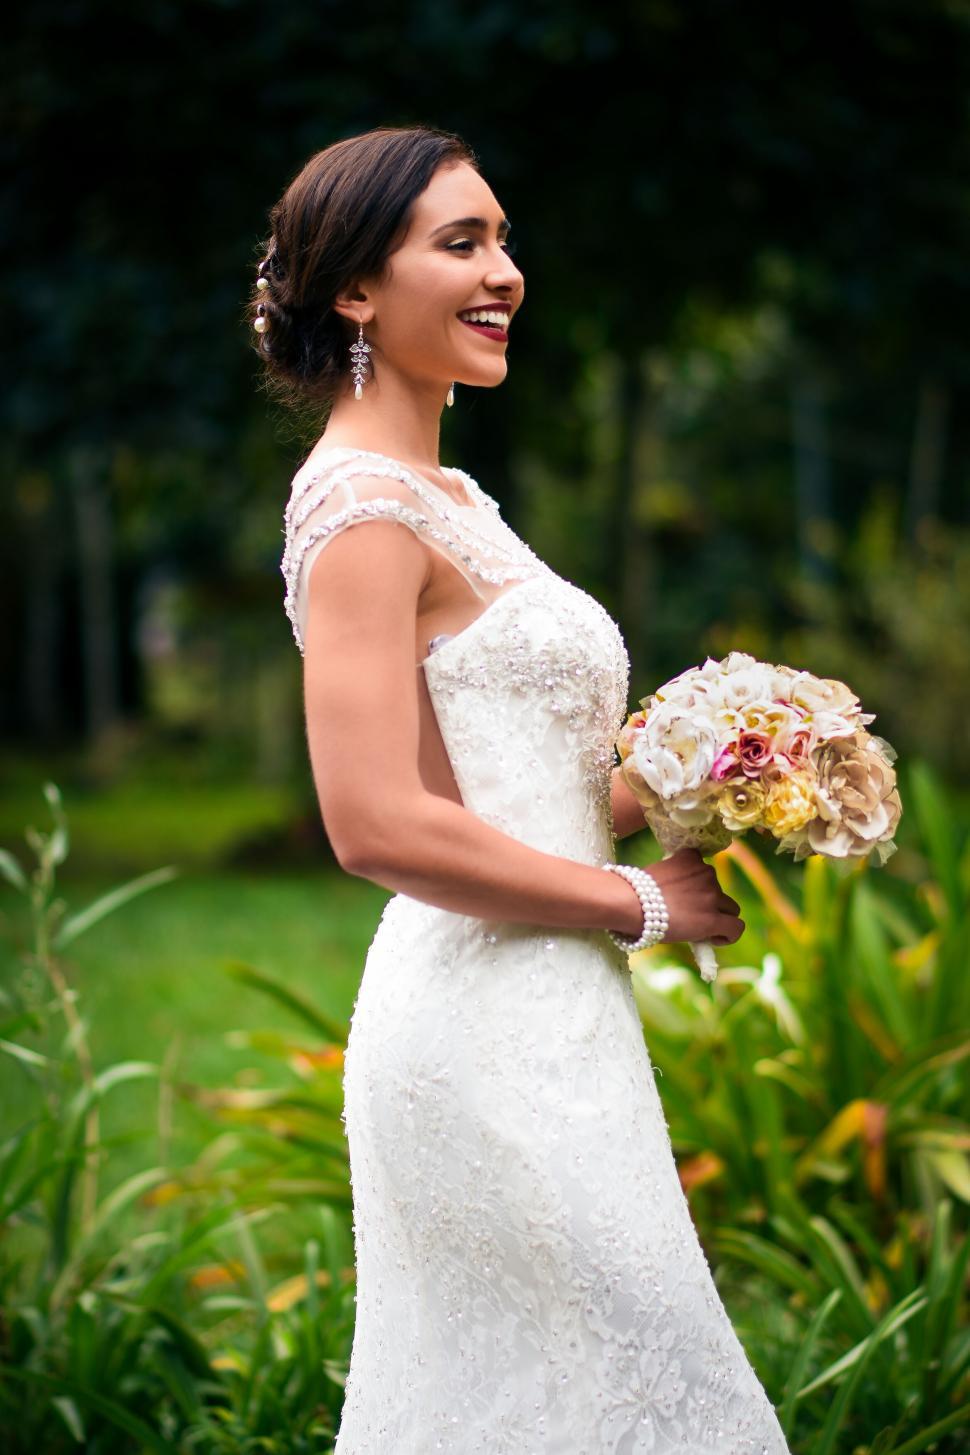 Free Image of Smiling bride holding a bouquet 